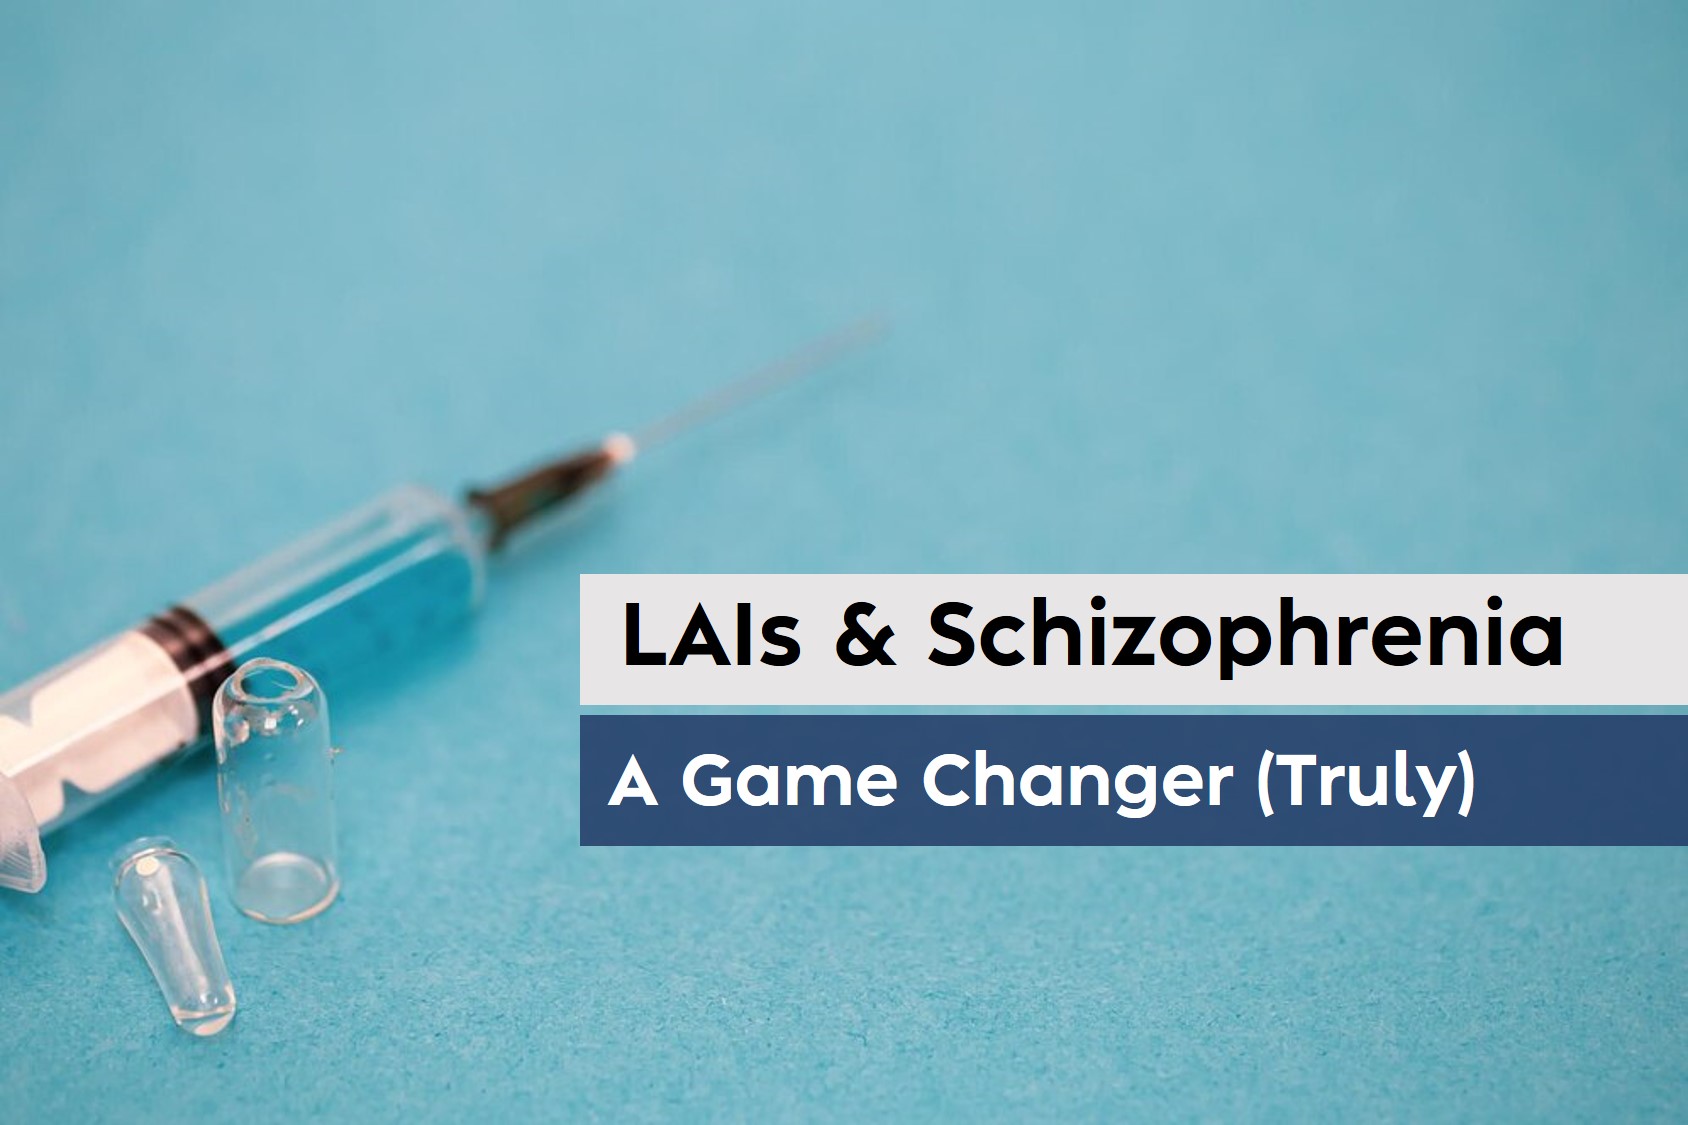 06. Long-acting injectable antipsychotics (LAIs) and their role in Schizophrenia- A Game Changer (Truly)_Banner